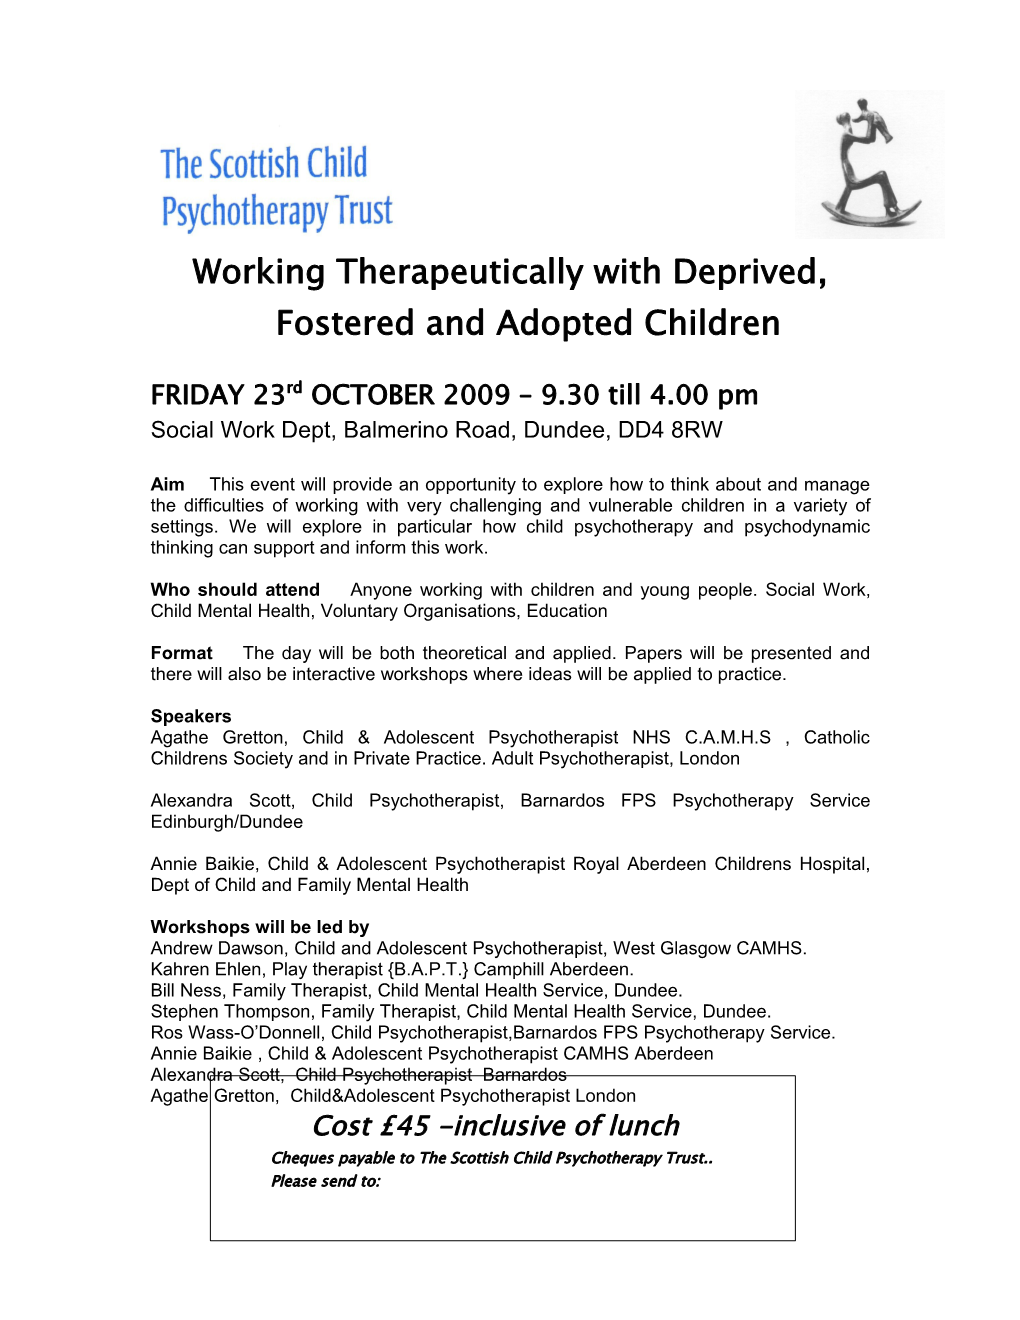 Working Therapeutically with Deprived, Fostered and Adopted Children